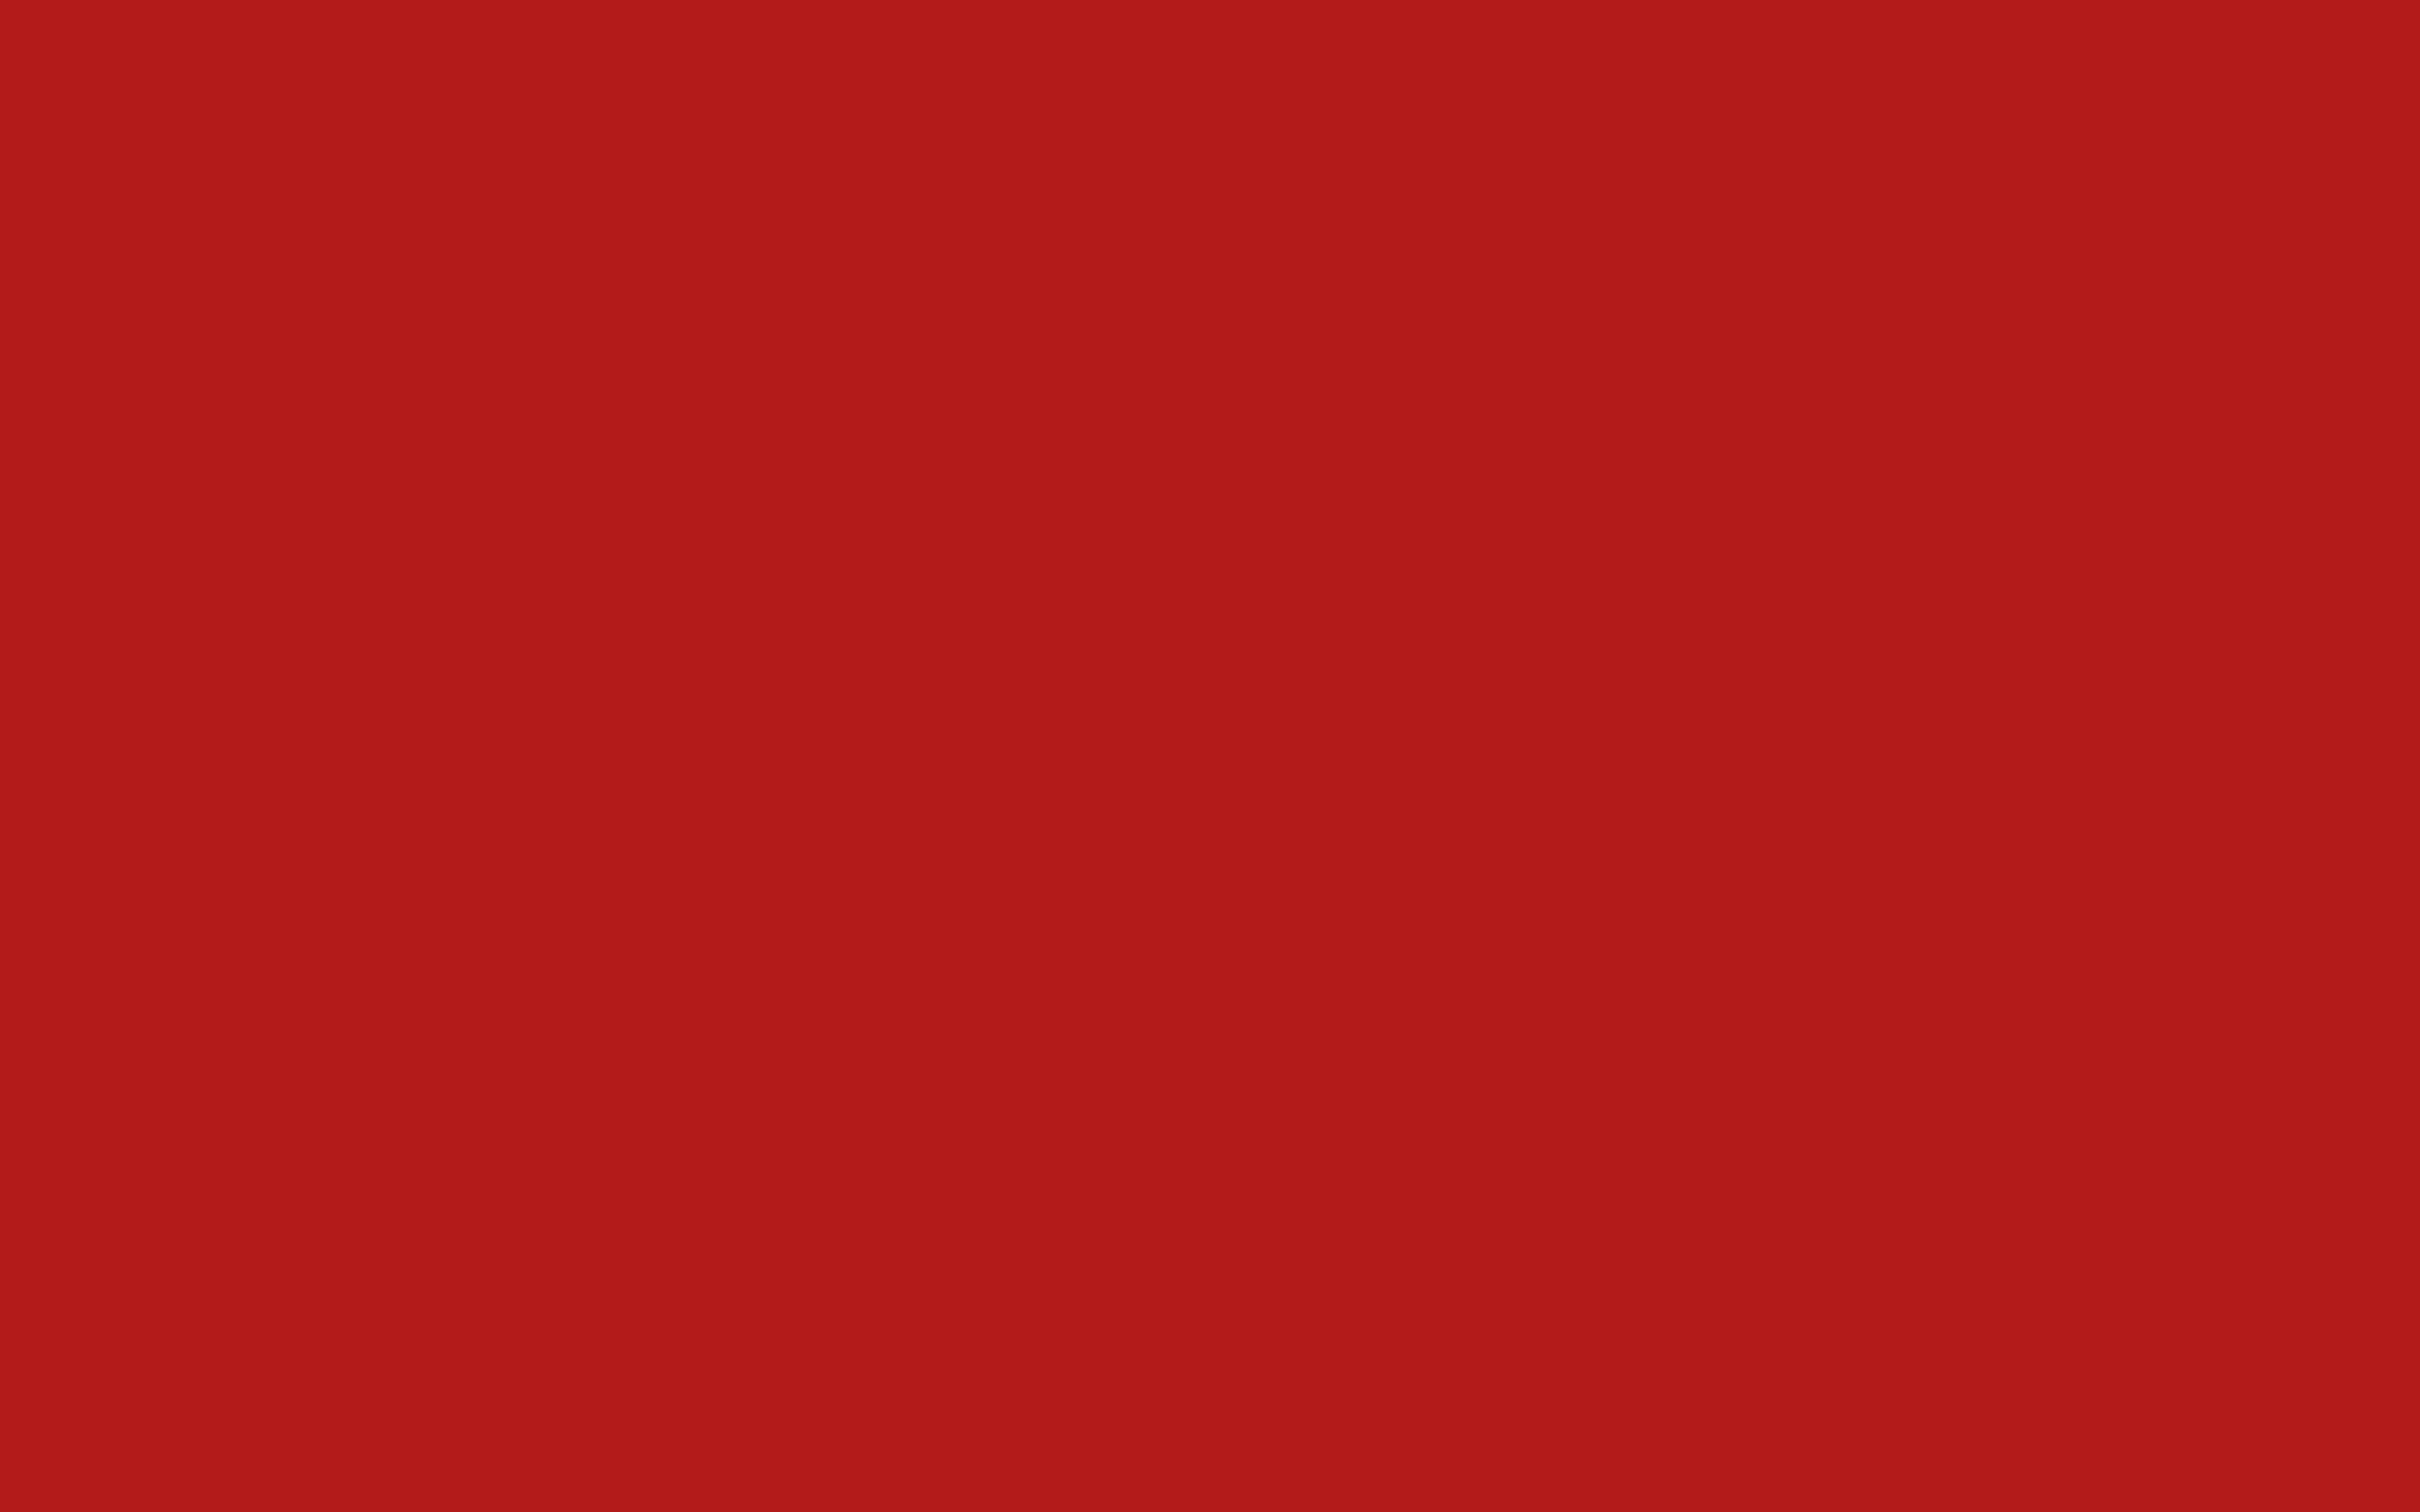 Image Cornell Red Solid Color Background Jpg